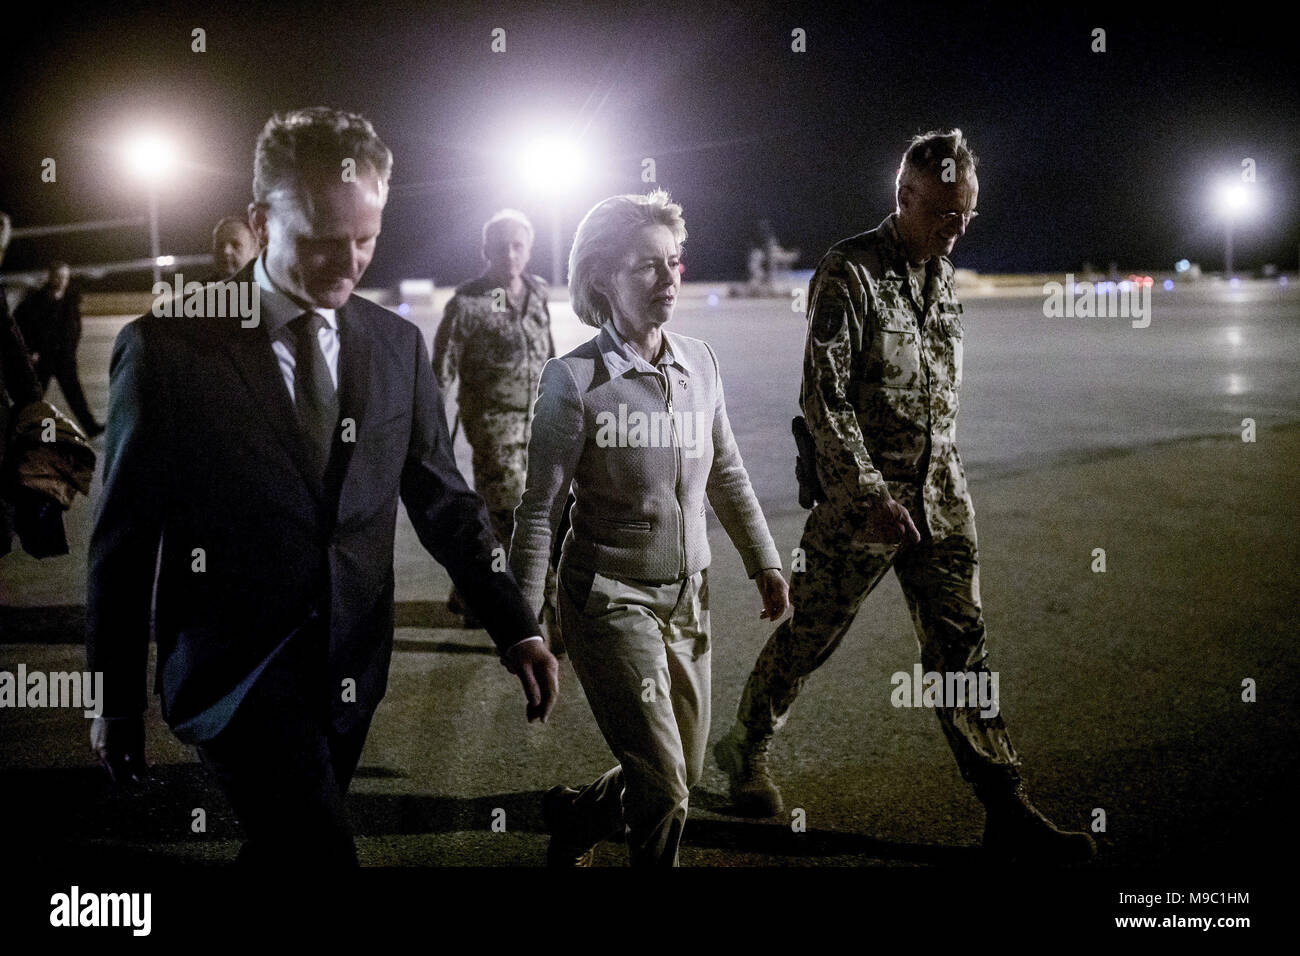 24 March 2018, Afghanistan, Mazar-e Sharif: German Defence Minister Ursula von der Leyen (CDU), being greeted by Bundeswehr (German Federal Armed Forces) general Wolf-Juergen Stahl (R) and general consul Robert Klinke (L) after her arrival to the Bundeswehr's camp. Photo: Michael Kappeler/dpa POOL/dpa Stock Photo